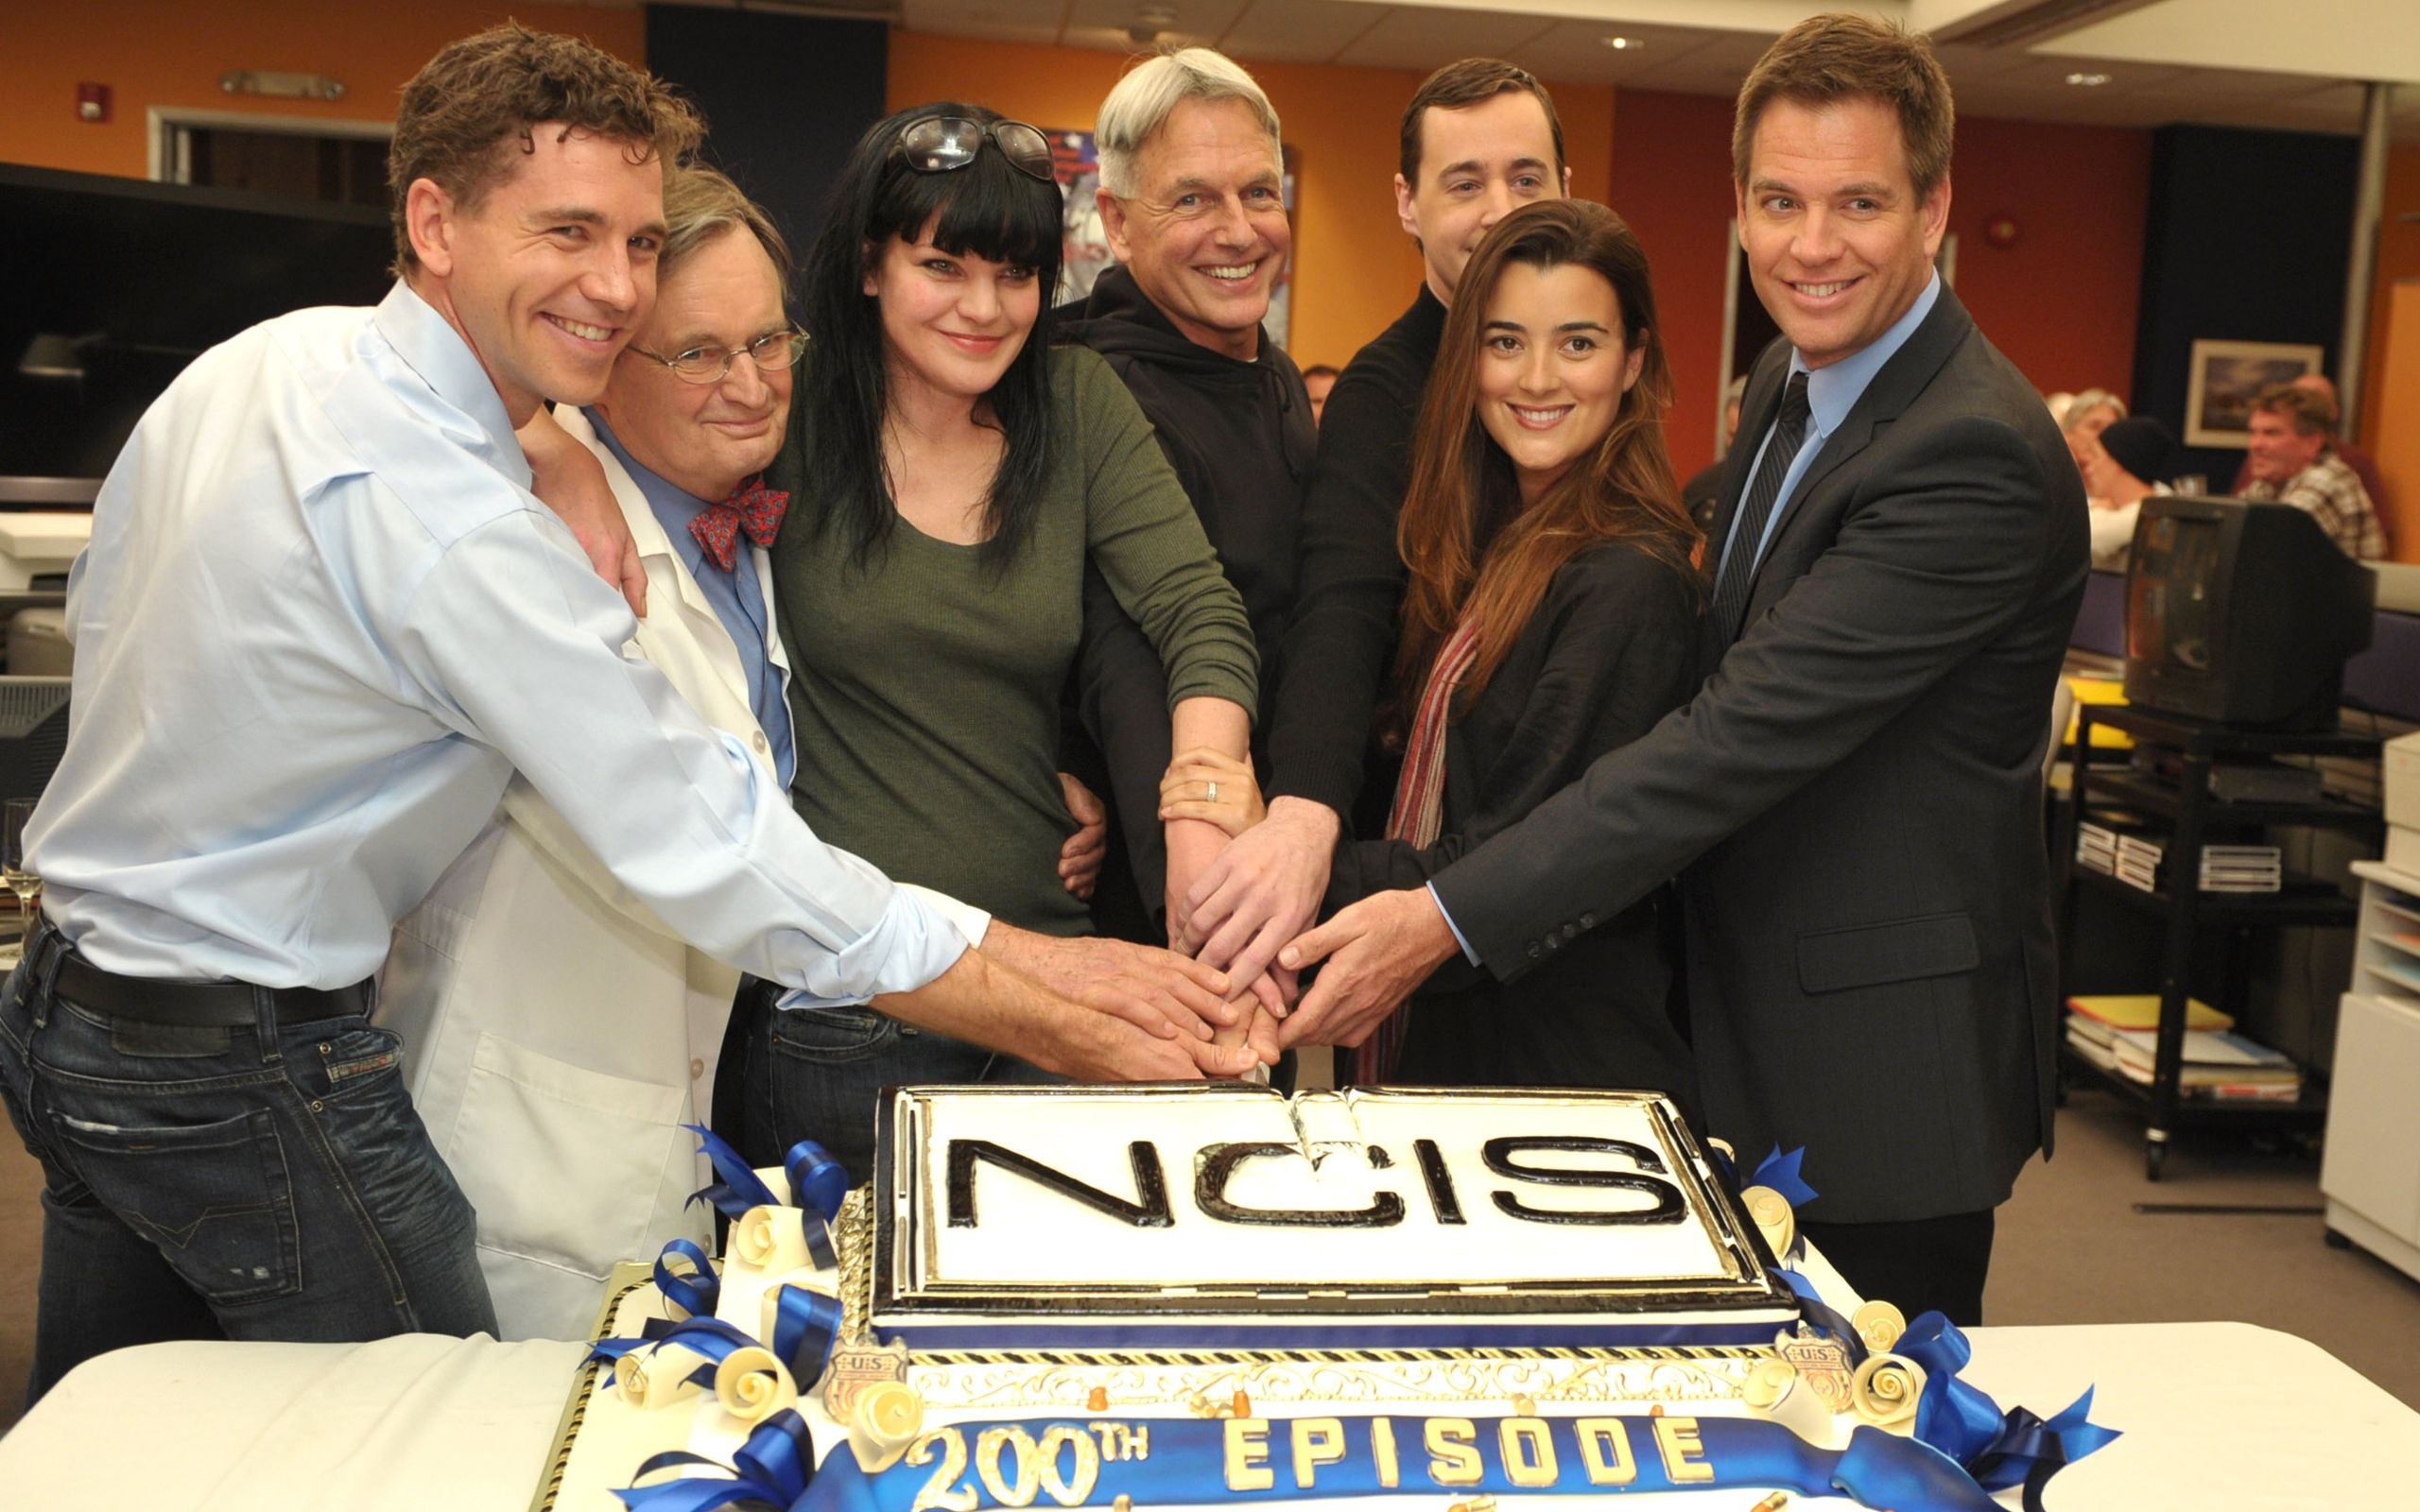 NCIS: Naval Criminal Investigative Service: This long-running crime drama, Gibbs, Ziva, Tony, Abby, McGee, Created by Donald P. Bellisario. 2560x1600 HD Background.